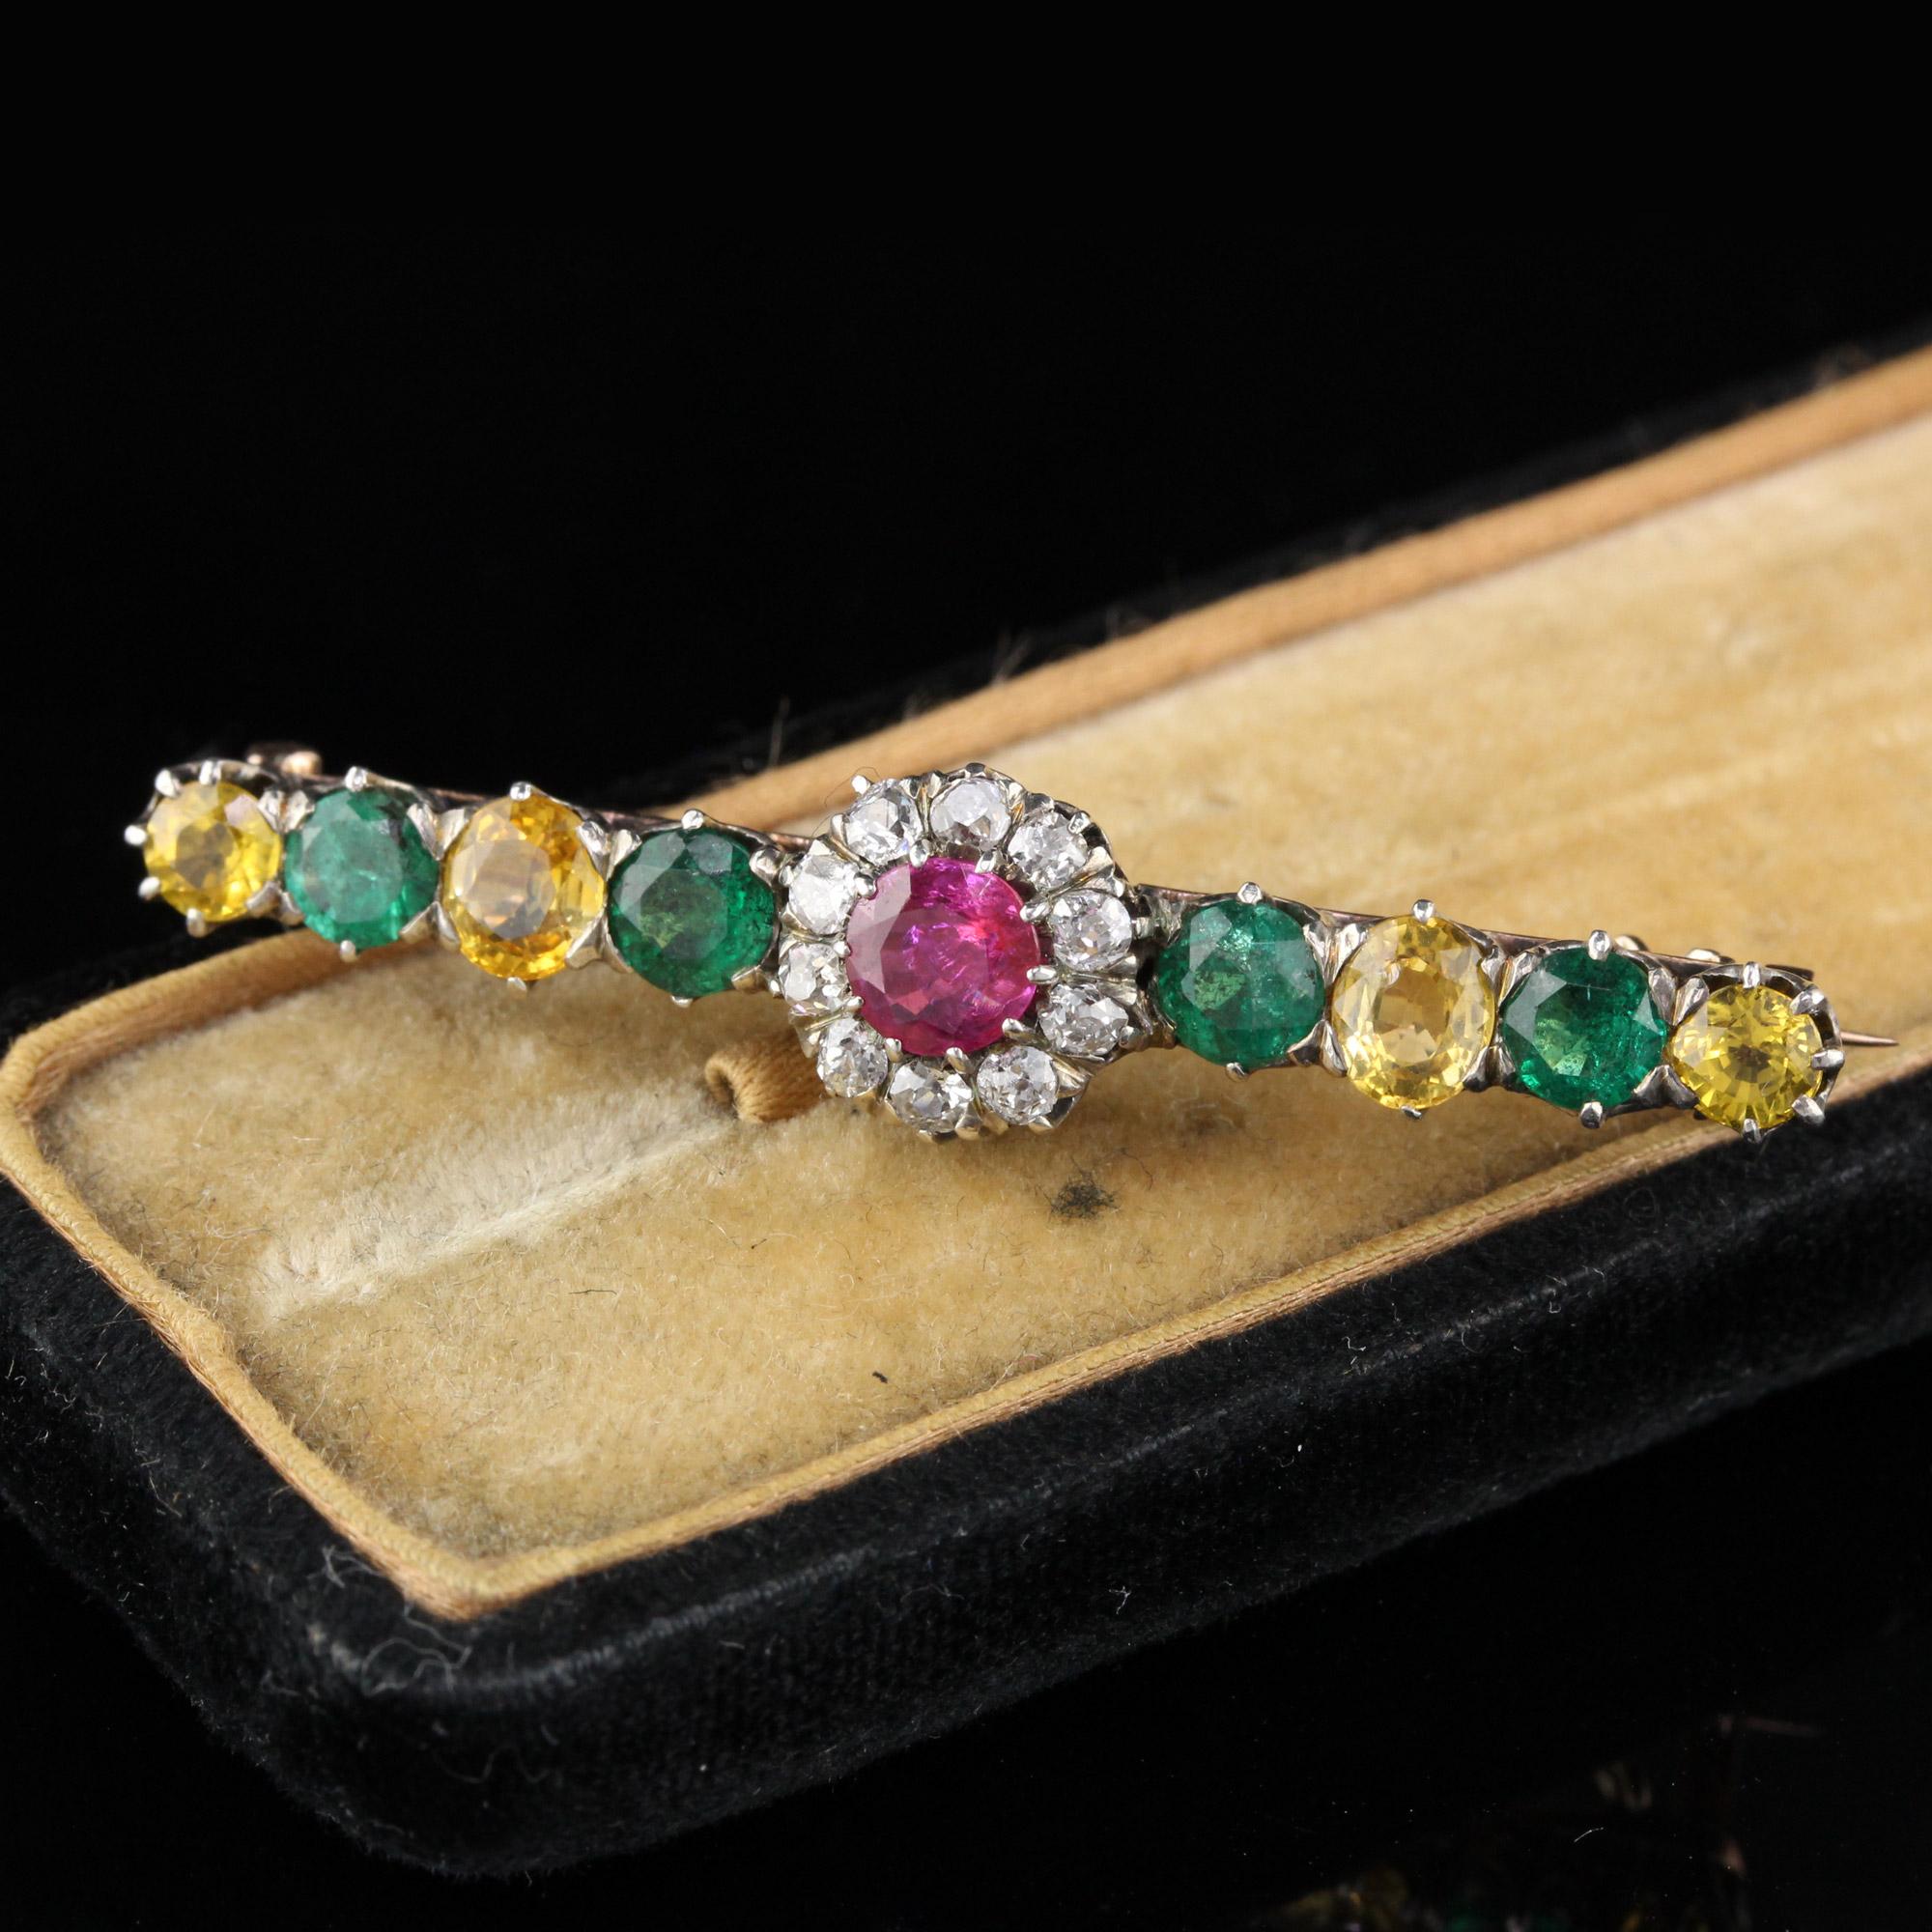 A playful & beautiful Victorian bar brooch with emeralds, yellow sapphires and a Burmese Ruby surrounded by a halo of old cut diamonds in the center!

Metal: 18K Yellow Gold

Weight: 5.8 Grams

Diamond Weight: Approximately 0.30 cts

Diamond Color: